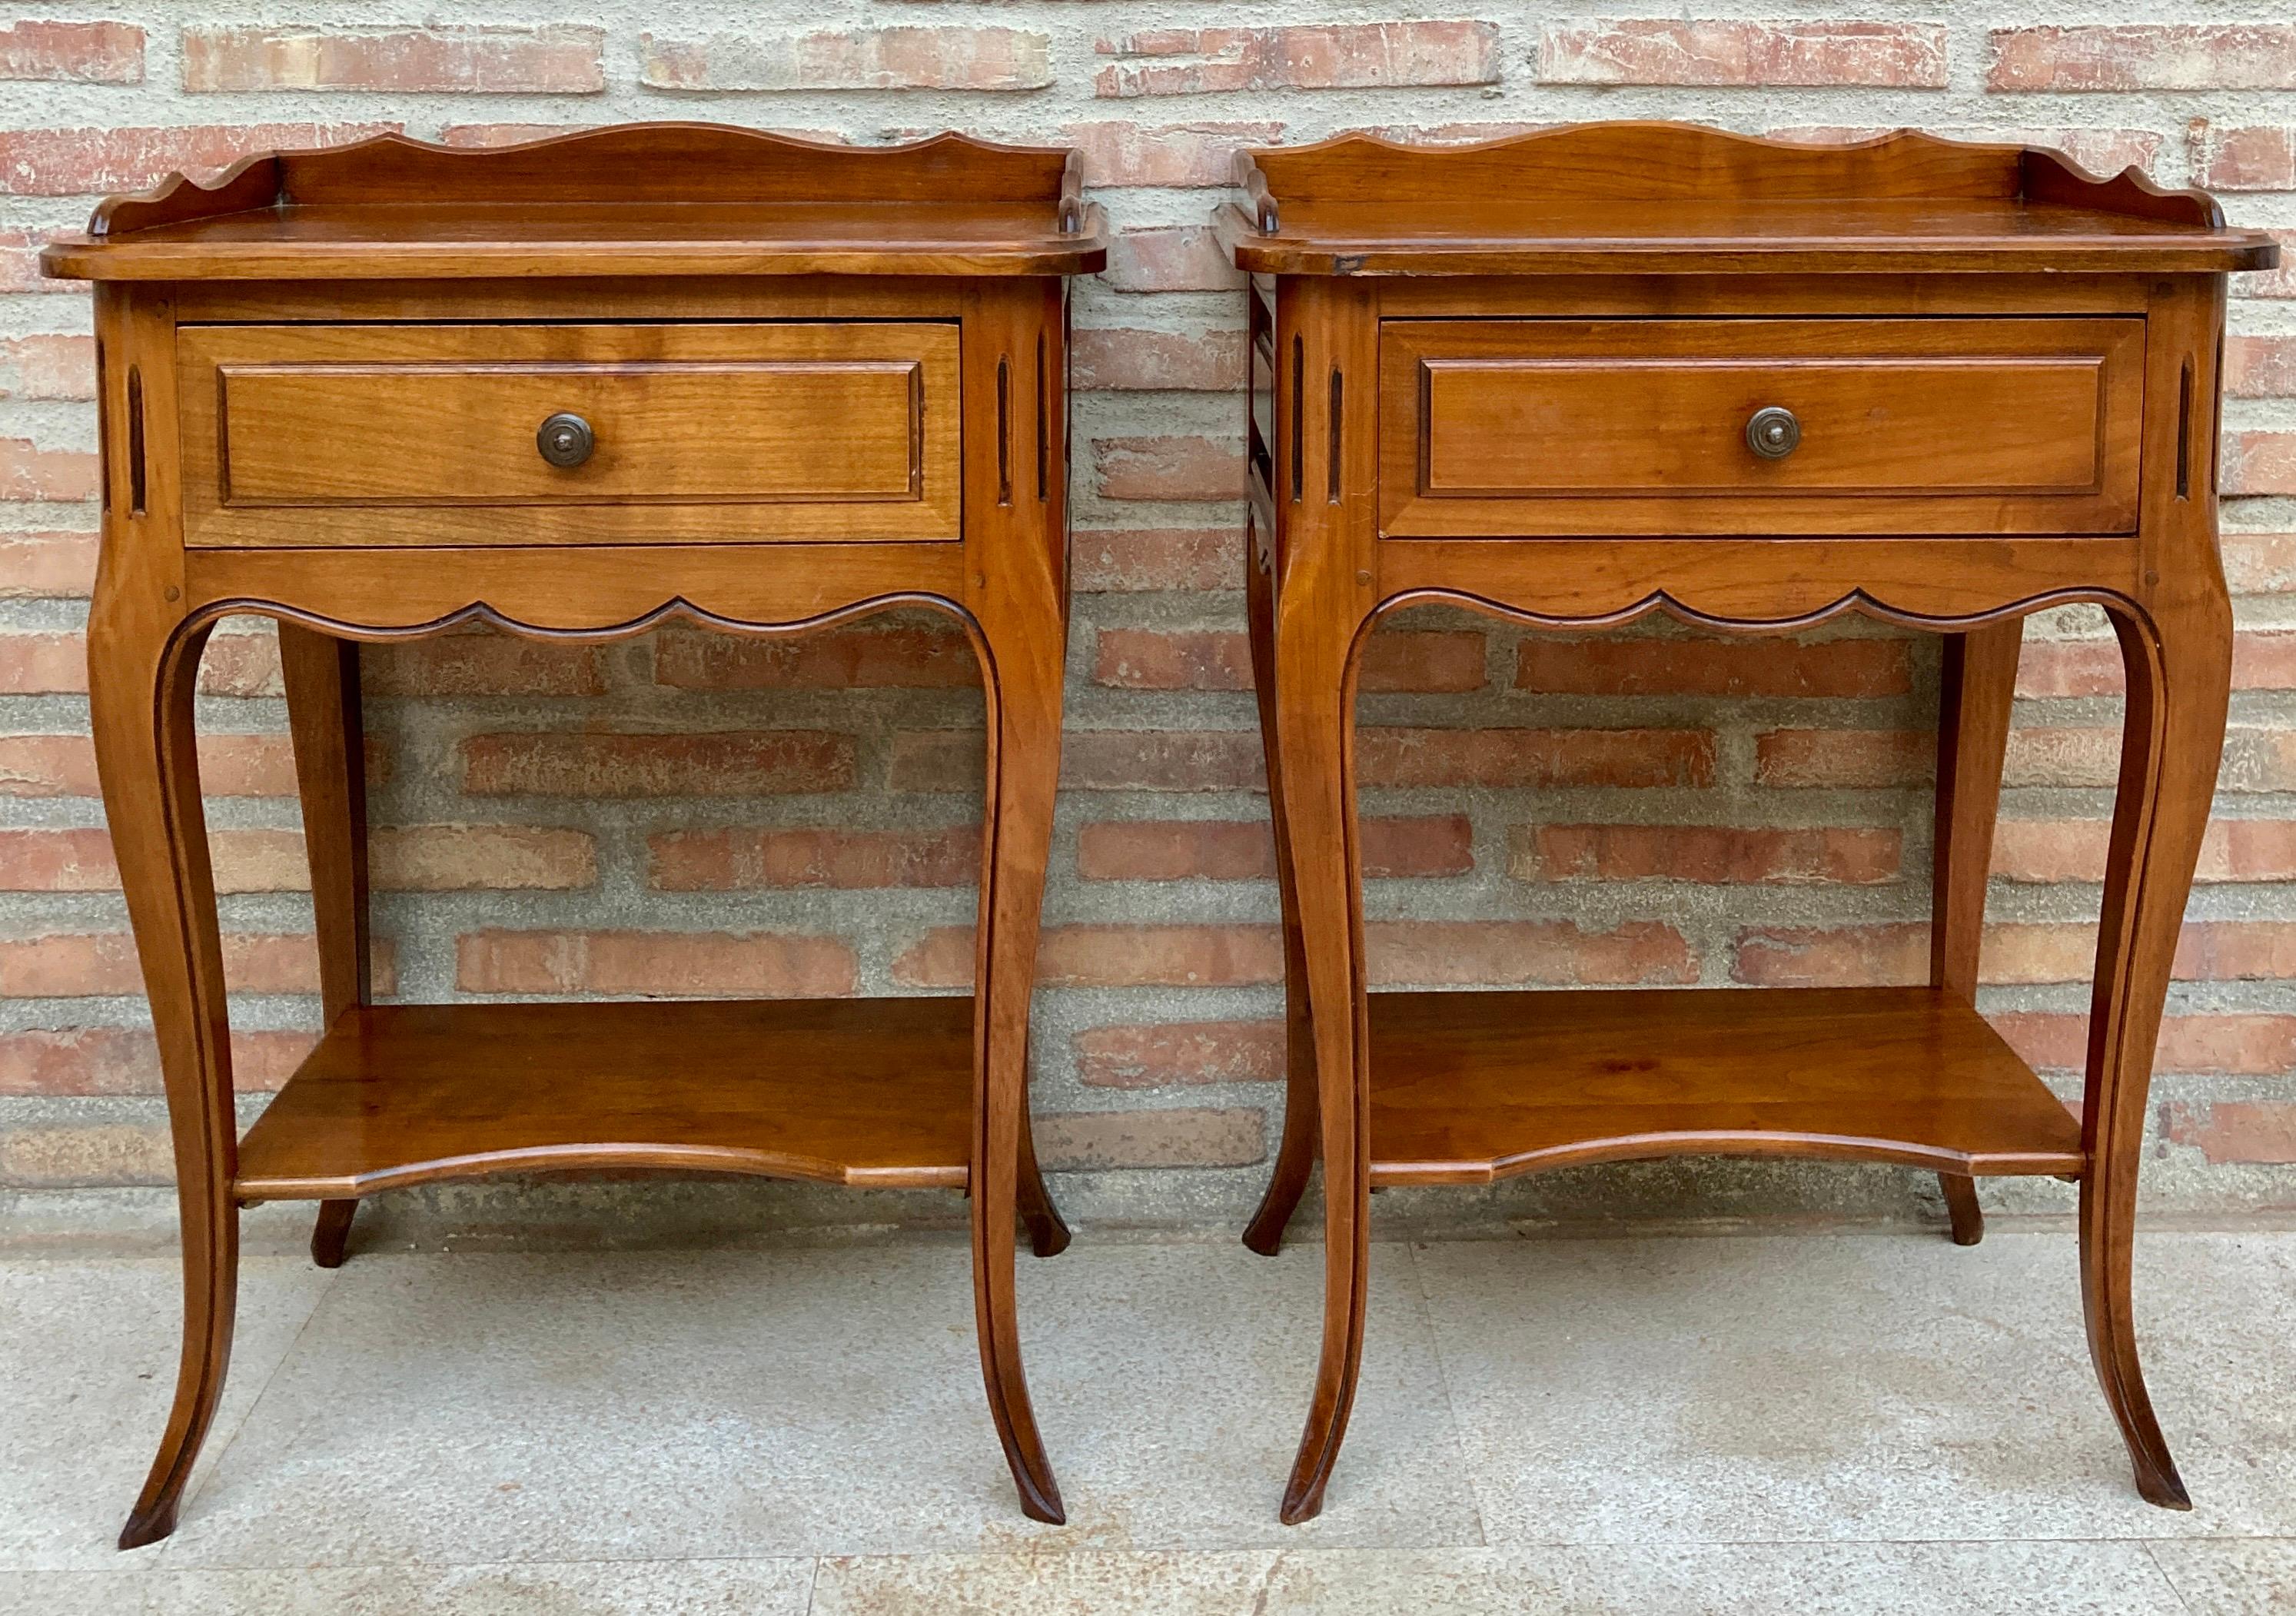 Pair of 20th century French bedside tables with a drawer, a low shelf and cabriolet legs. The tables have beautiful carving on the legs and sides and skirting on the front. They also have a low shelf on top and a ridge around their lid. 
Very nice